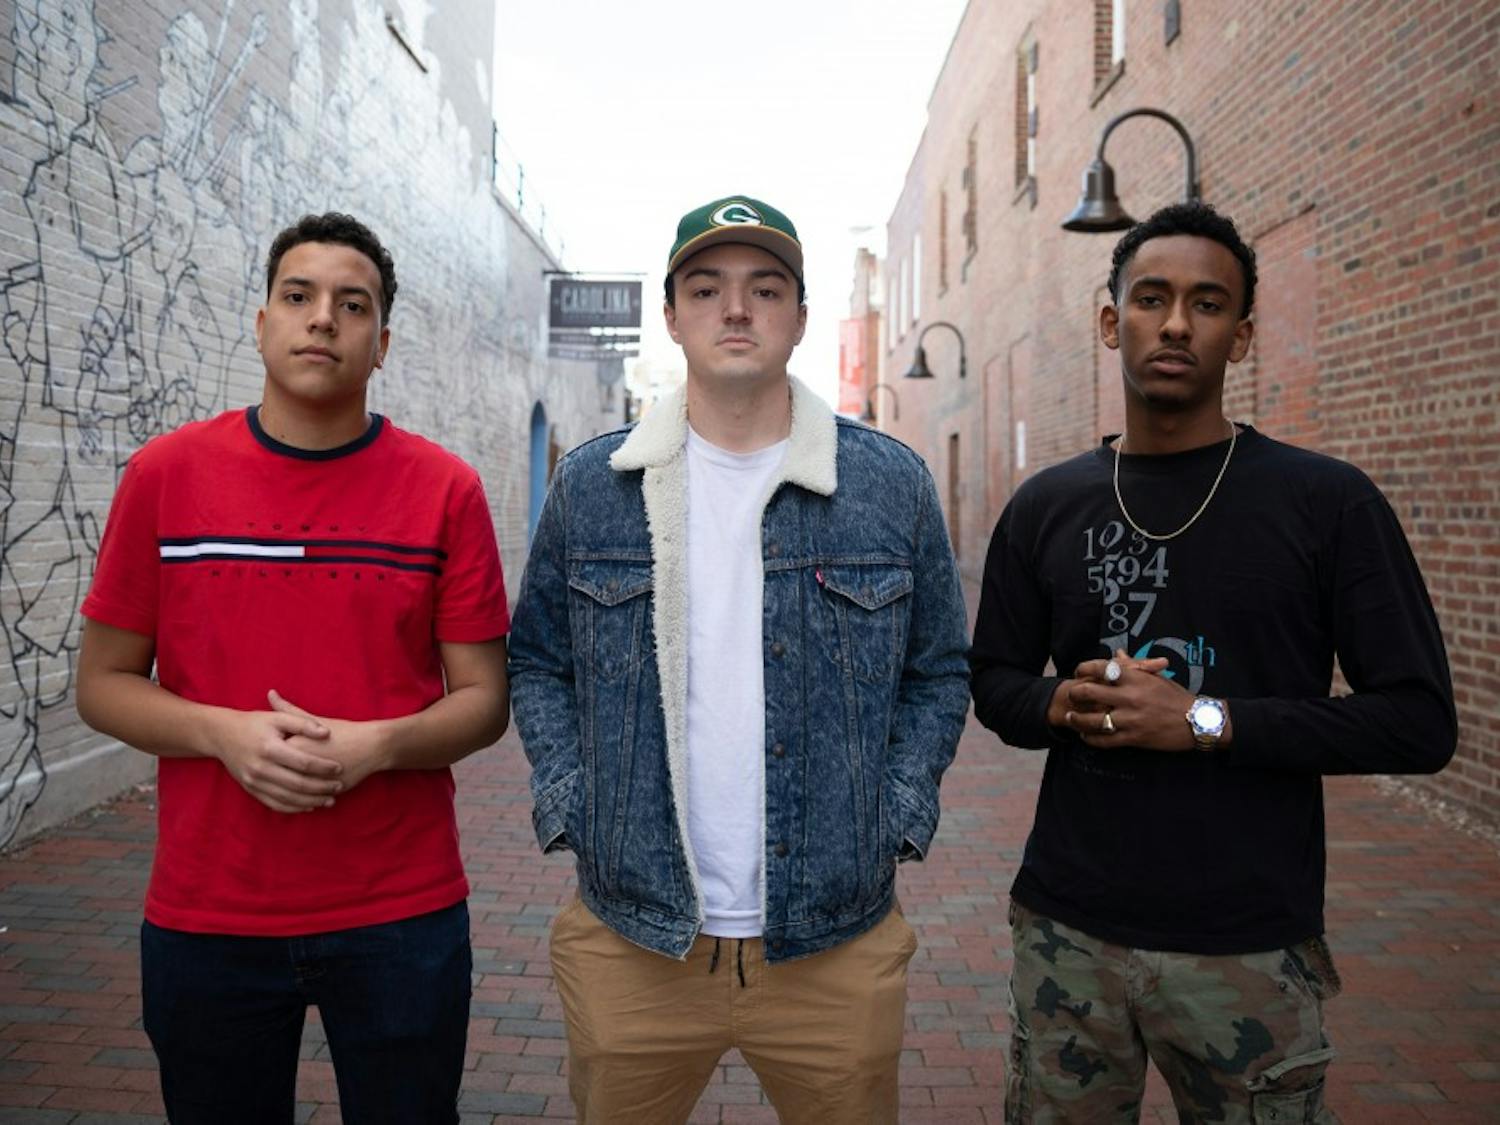 Seniors Nicho Stevens (left), Chris Coogan (middle), and Jemal Abdulhadi (right) of the UNC Student Hip Hop Organization (UNC SHHO) pose for a portrait on Friday, Jan. 18, 2018 in the alley next to Carolina Coffee Shop located on Franklin Street in Chapel Hill, North Carolina. Abdulhadi (right) discussed his experiences as a hip hop artist in lieu of the #MeToo movement which began in October of 2017.